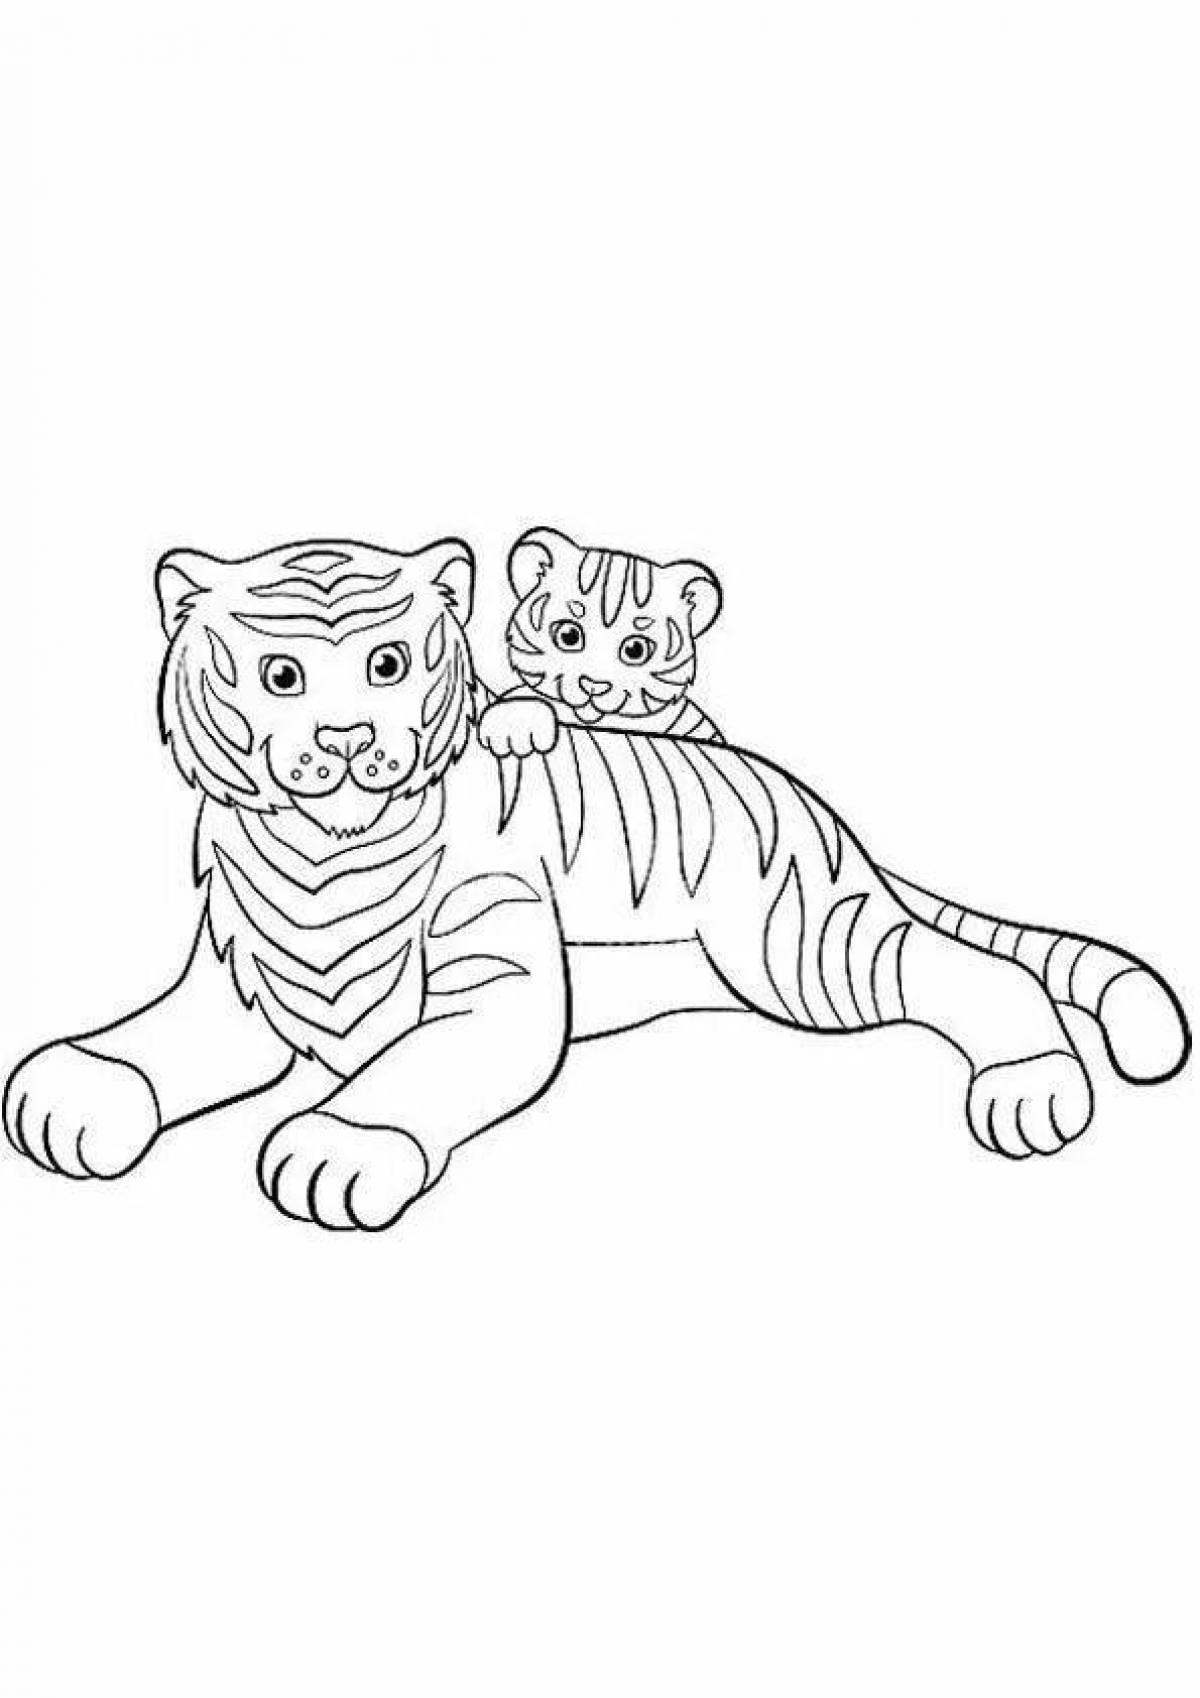 Glowing white tiger coloring page